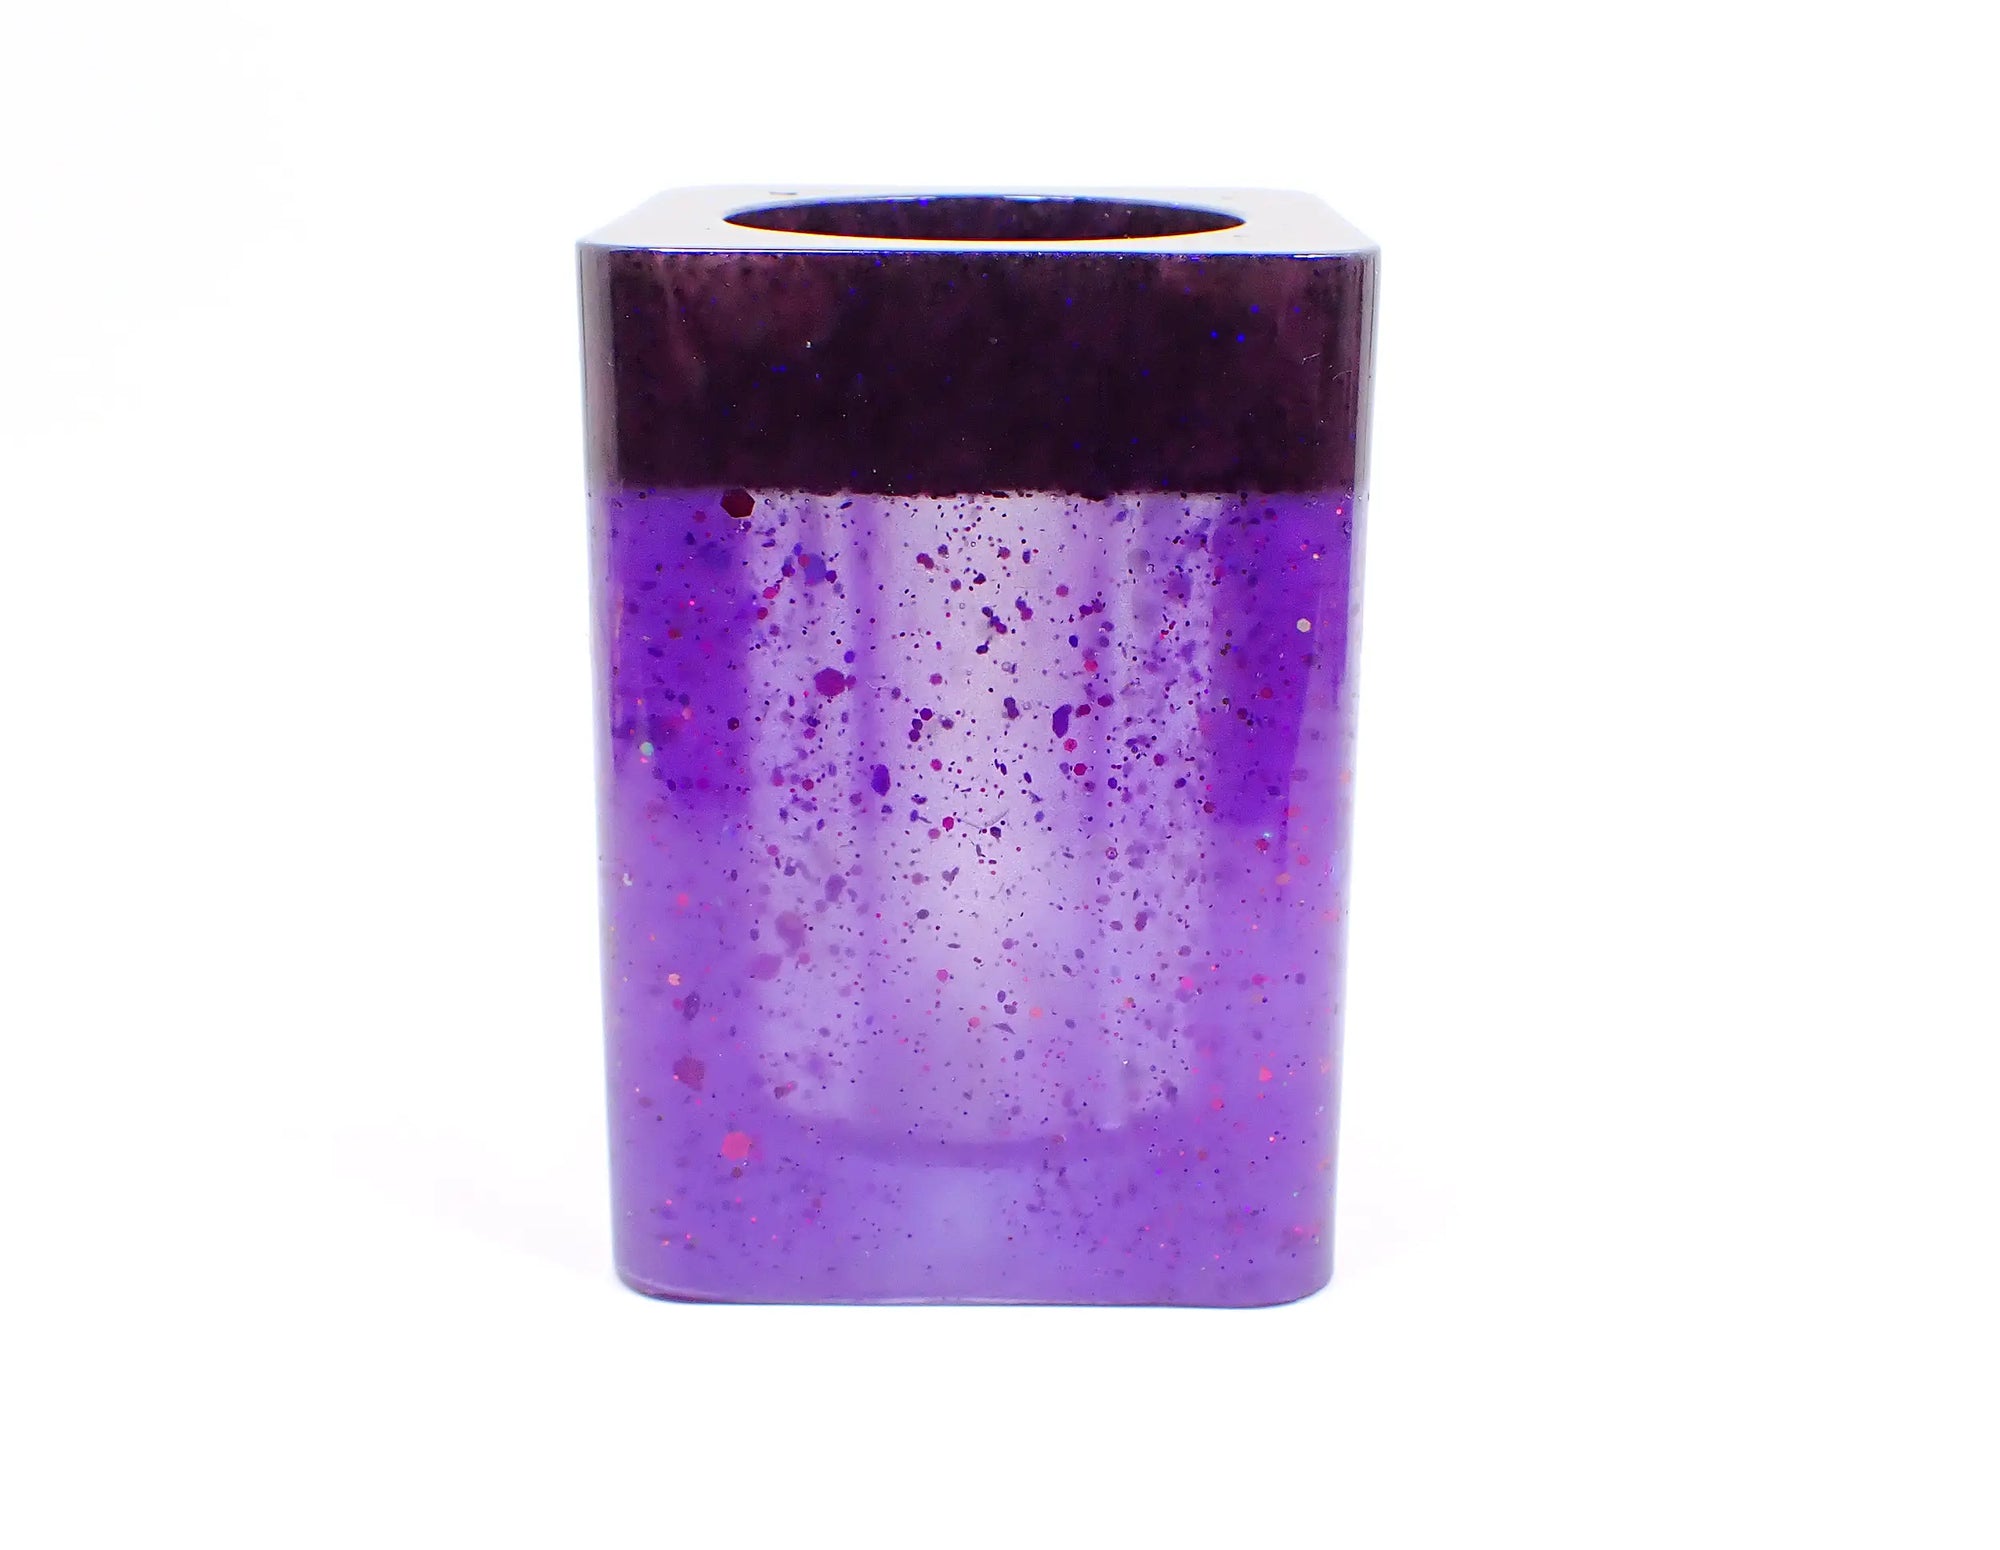 Square Handmade Pearly Purple and Glitter Resin Makeup Brush or Toothbrush Holder